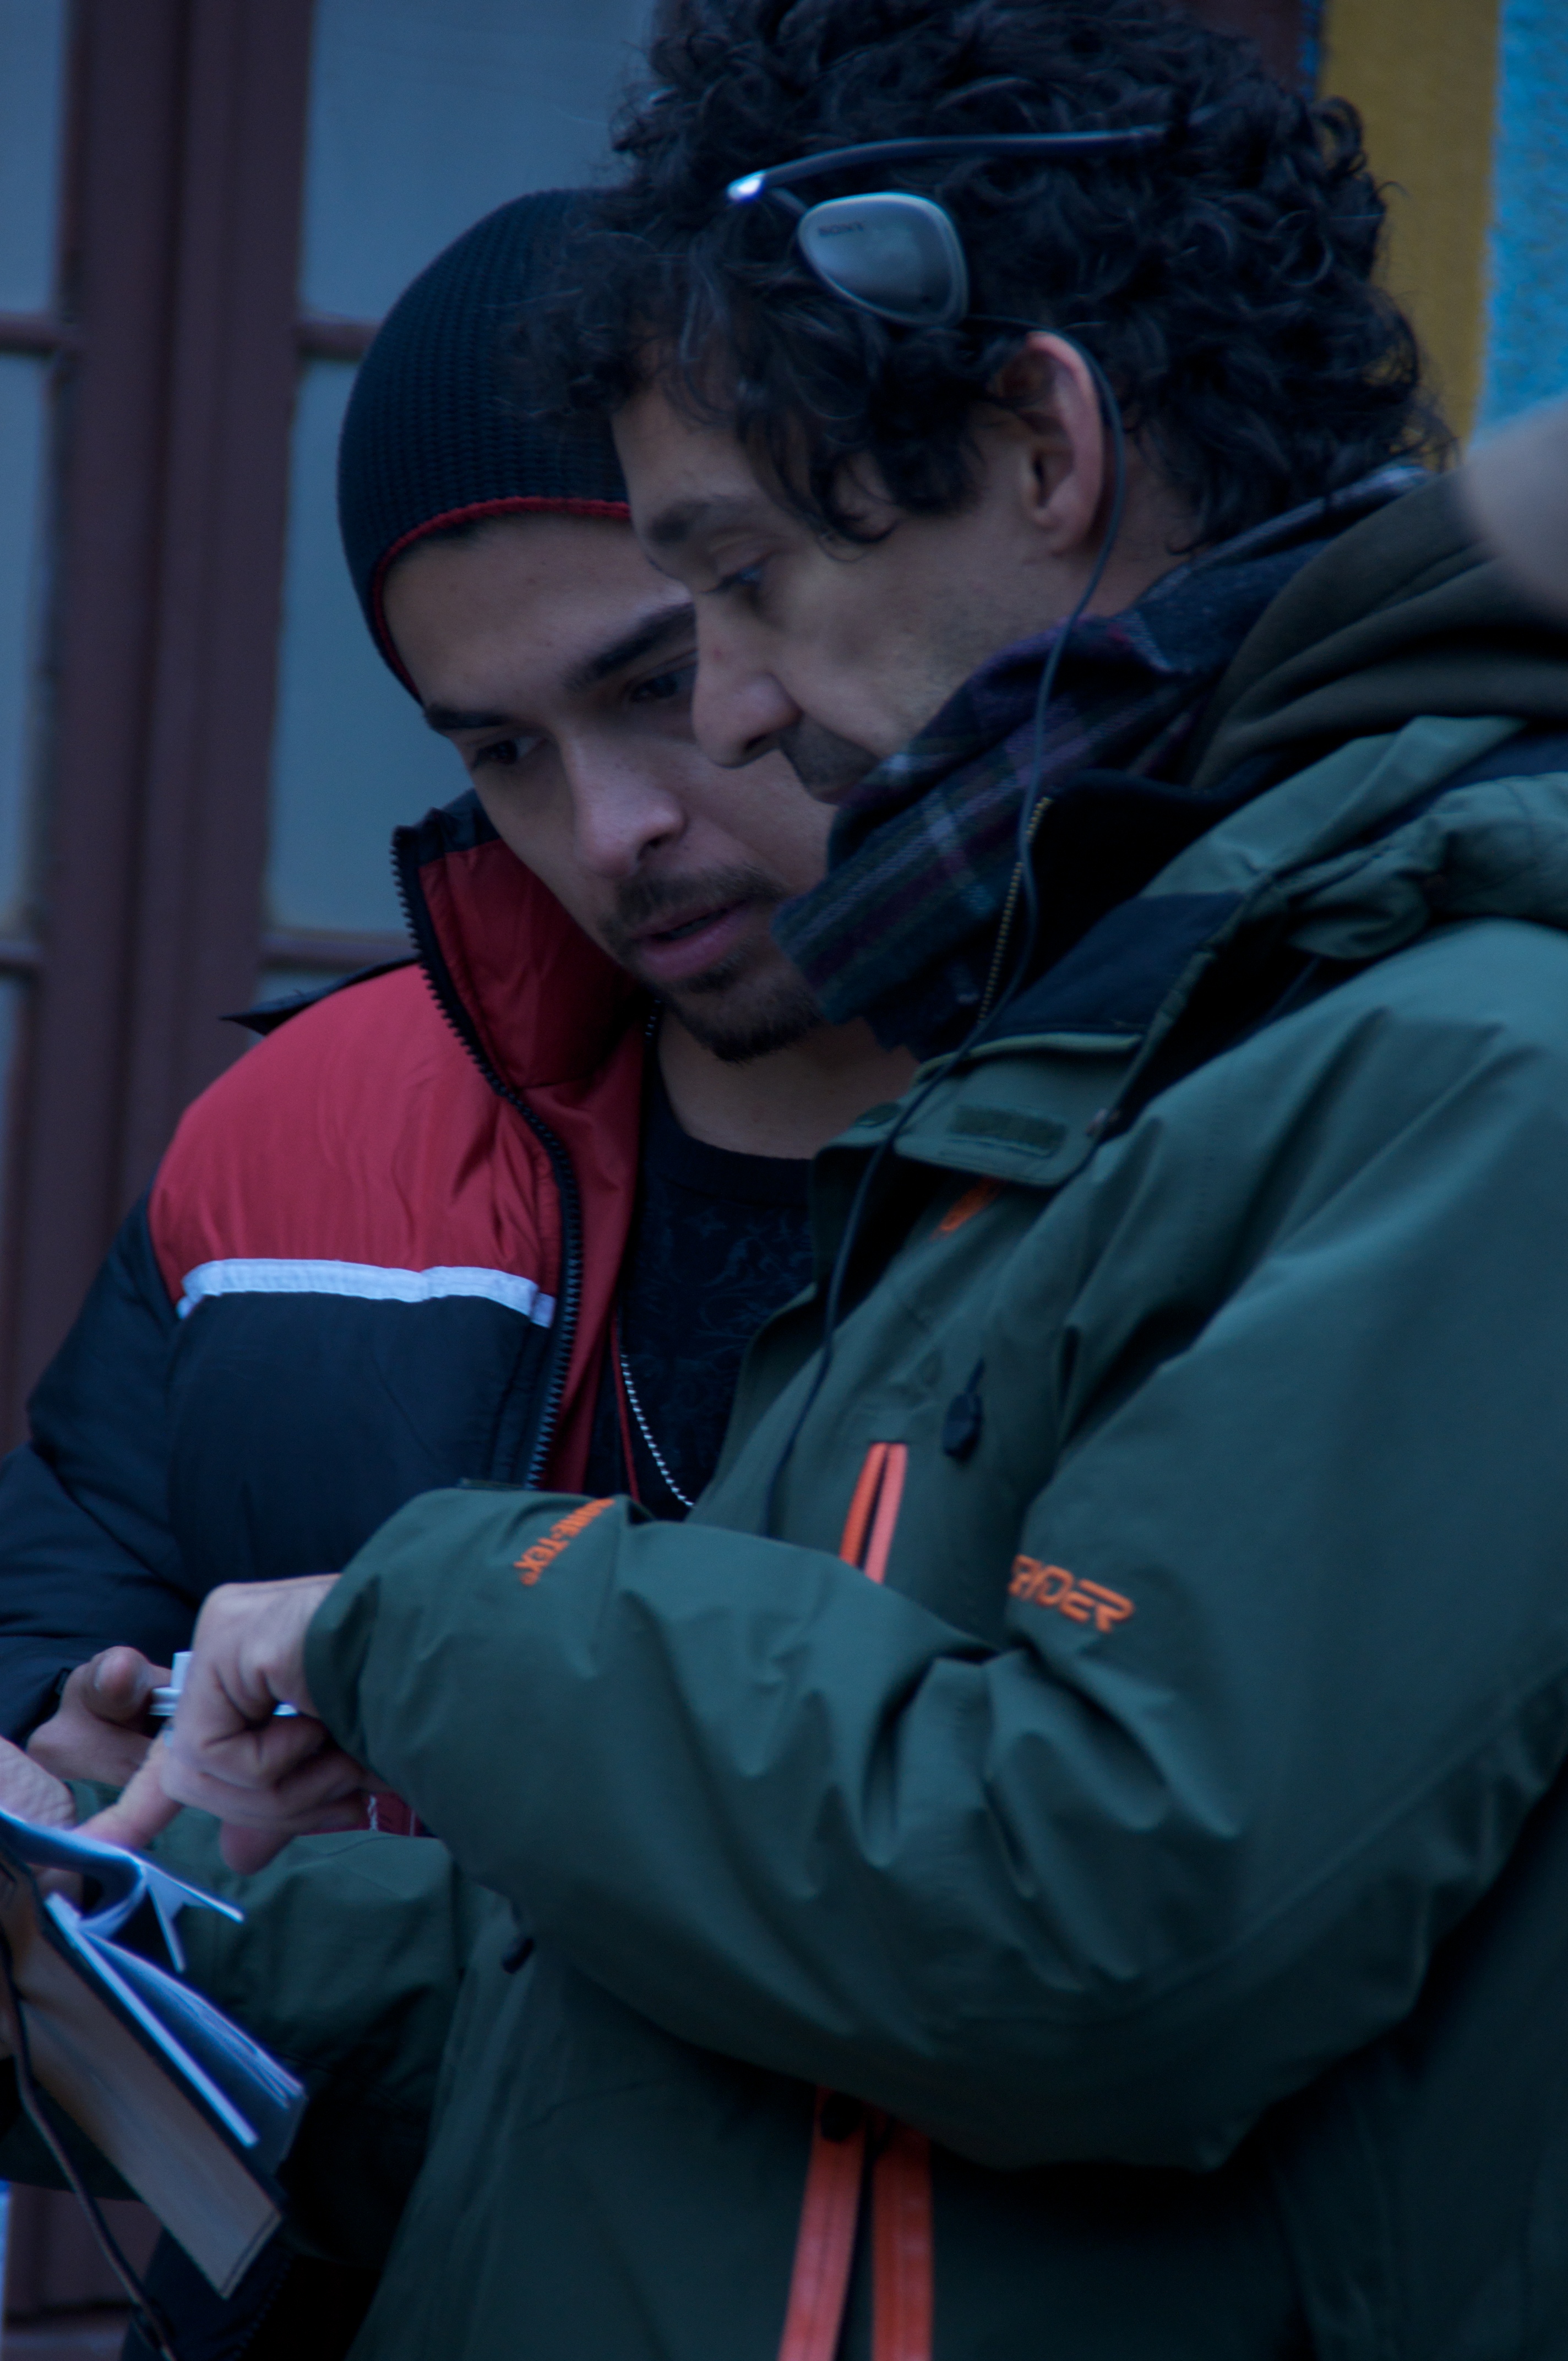 Actor Wilmer Valderrama and director Angel Gracia on the set of From Prada to Nada